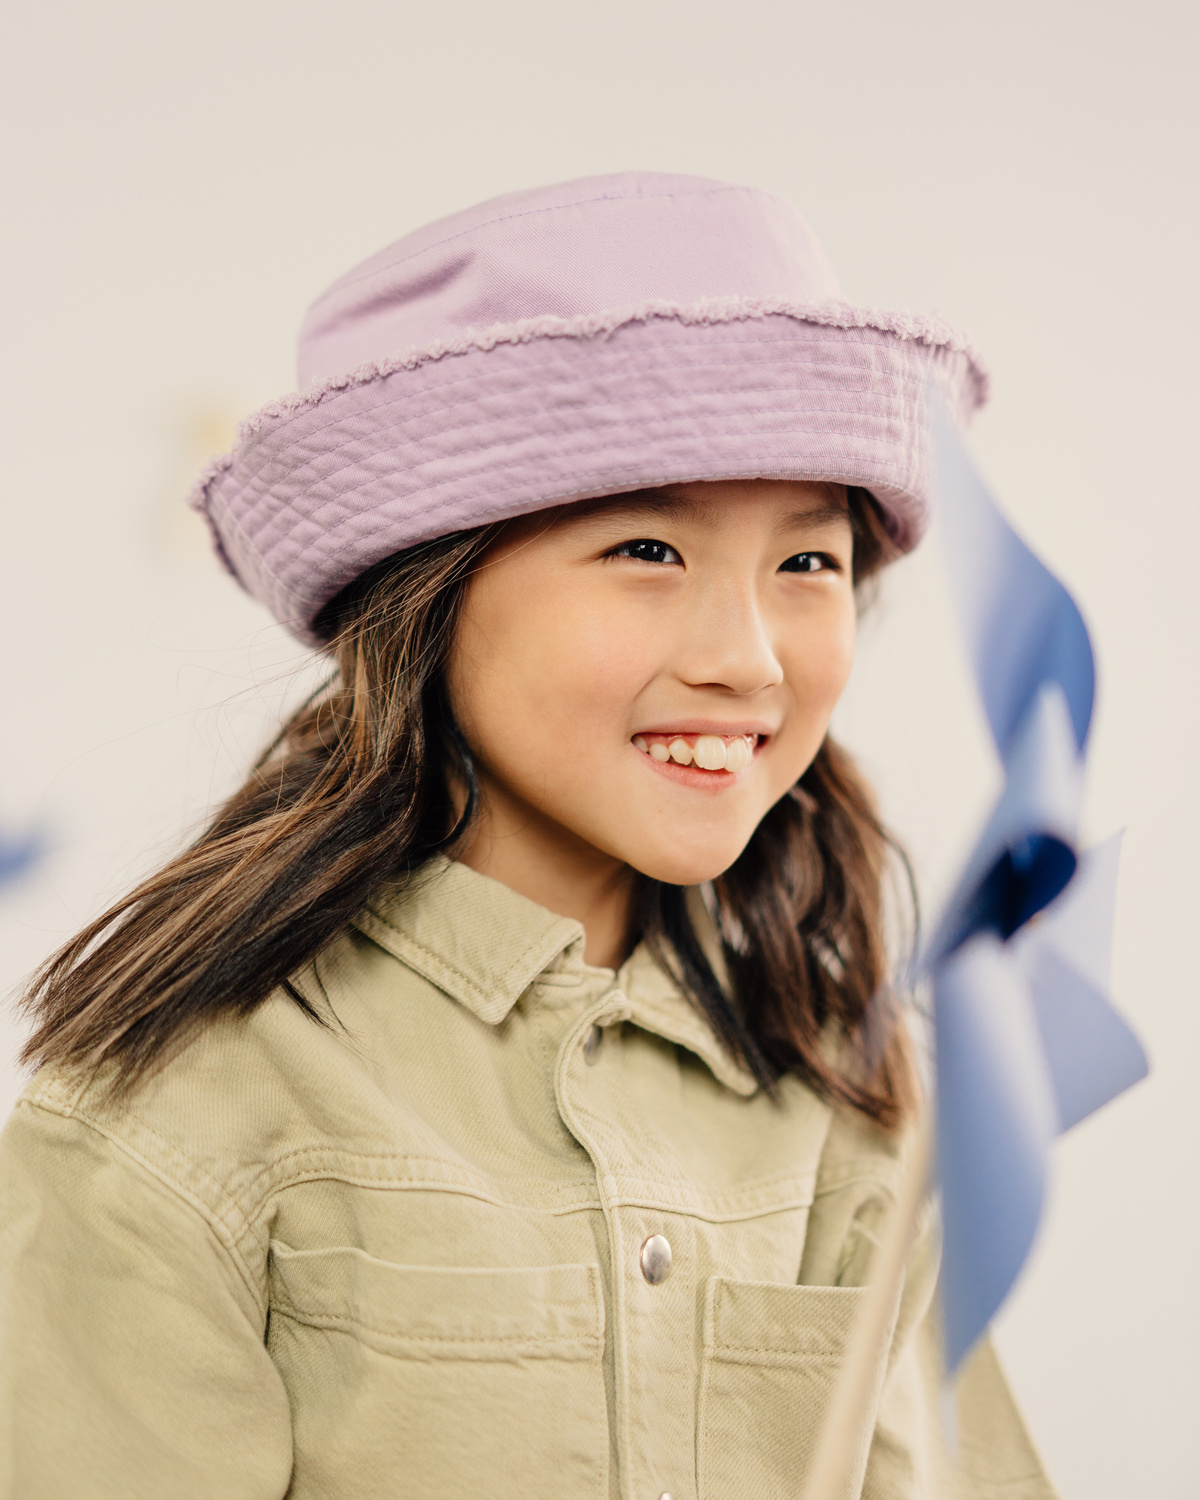 A Girl in Beige Shirt Smiling while Wearing a Purple Hat